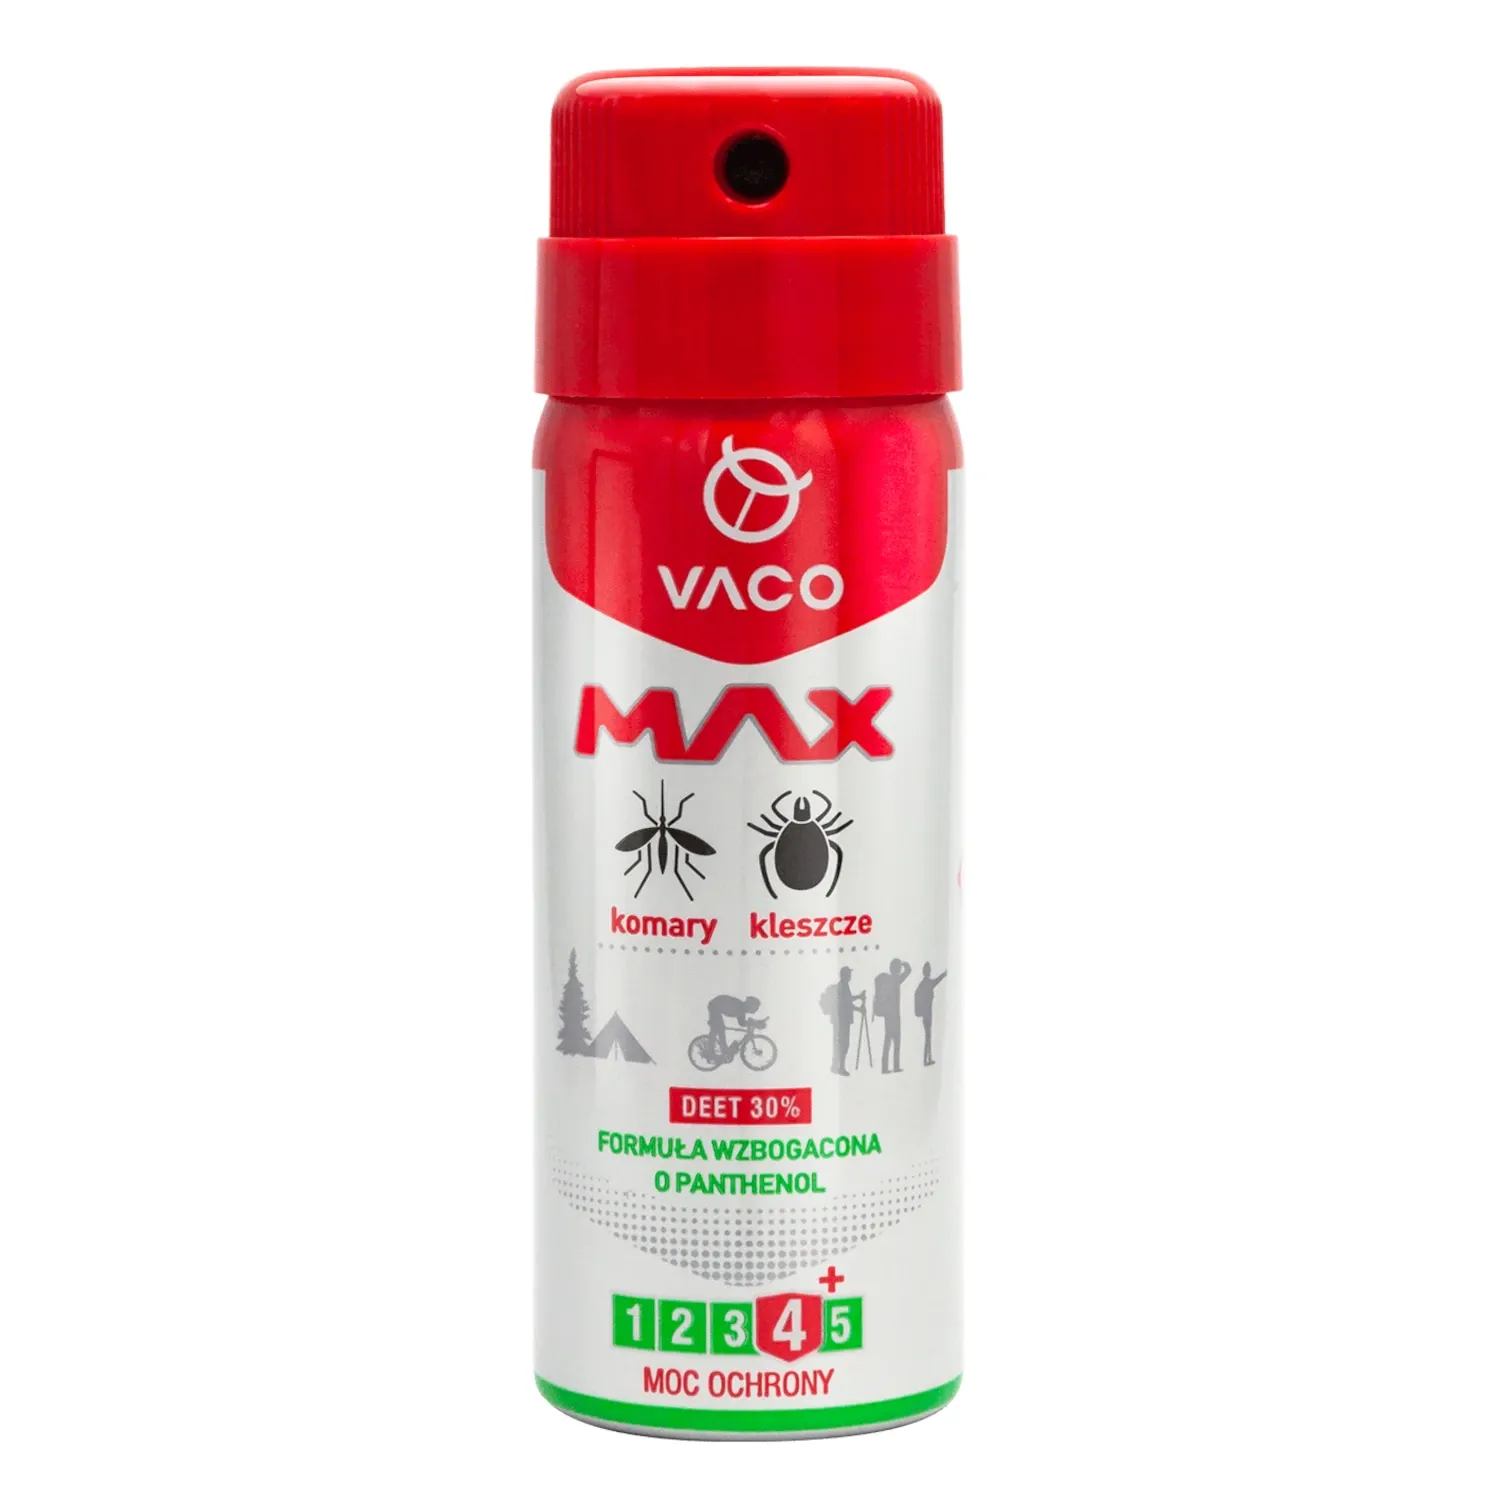 VACO Spray MAX for mosquitoes, ticks, messes with PANTHENOL (mini)